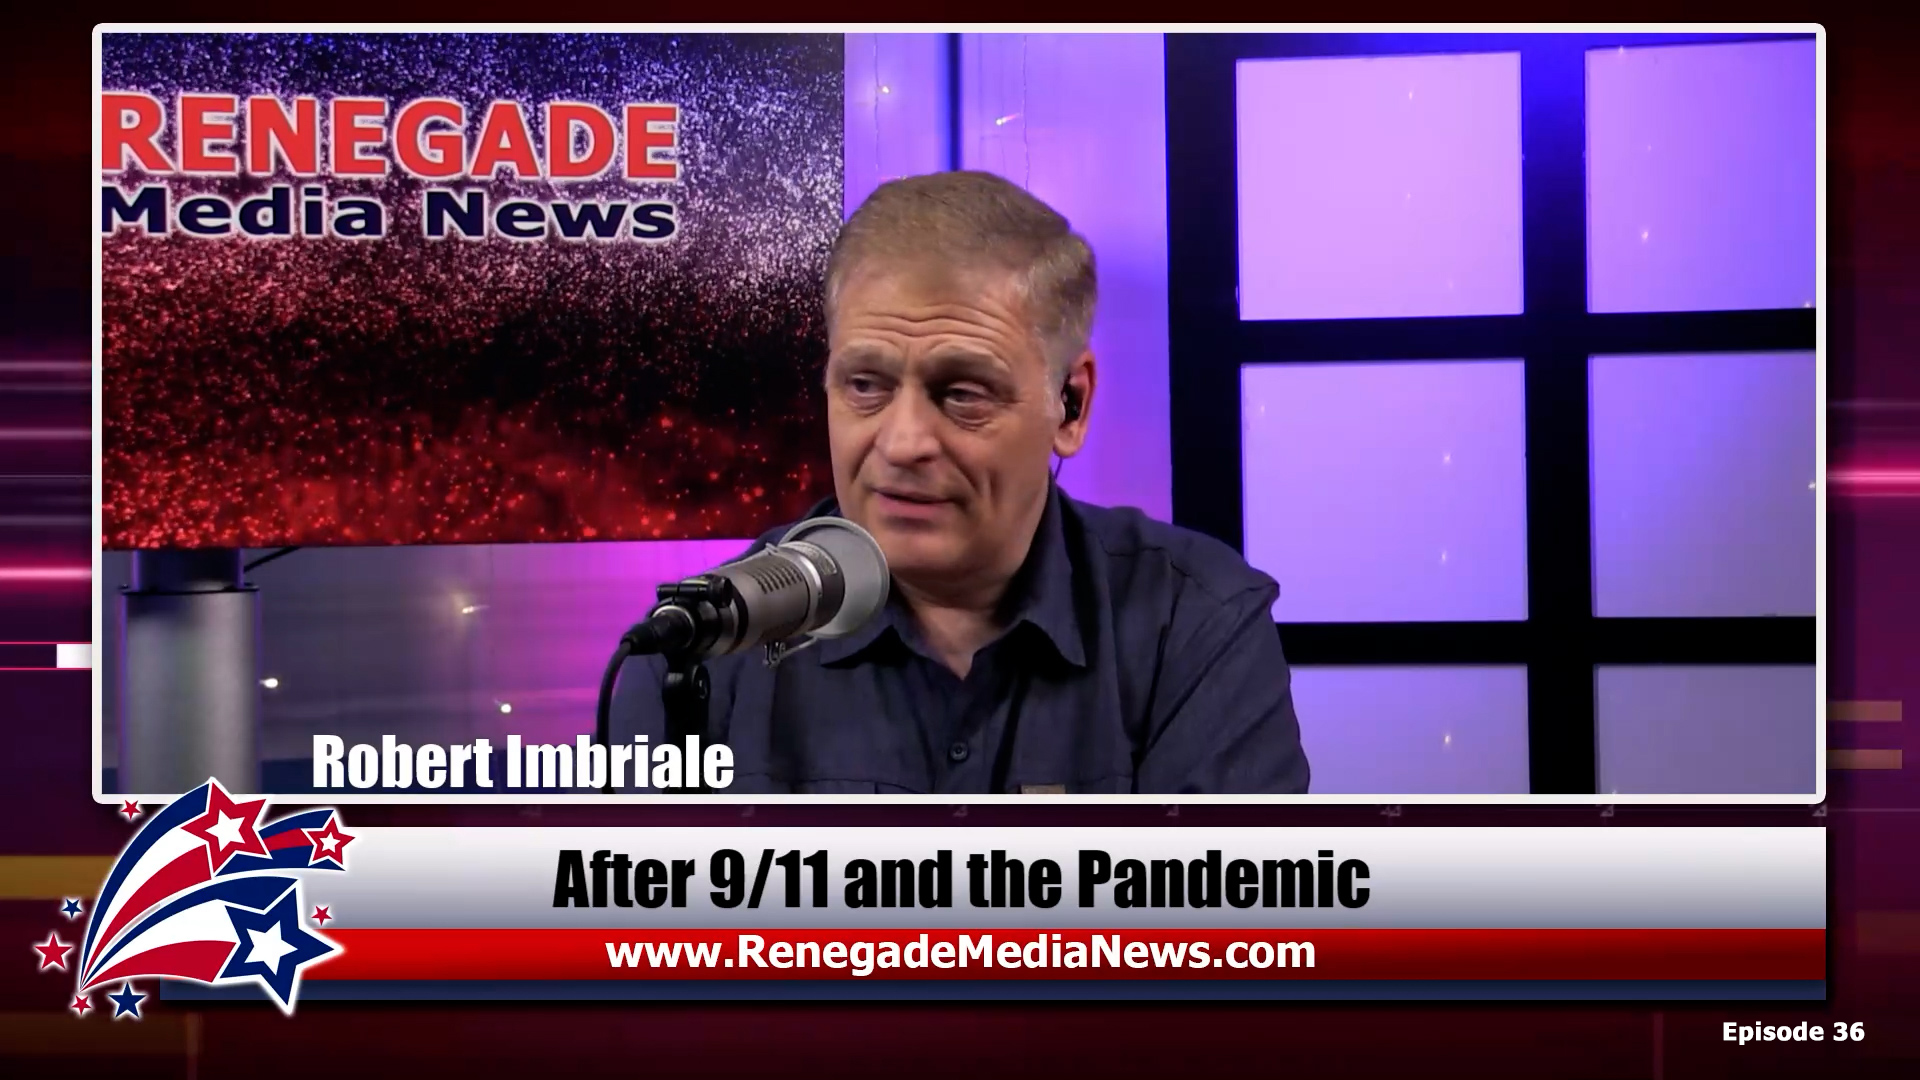 The Impact of 9/11 and the Pandemic is Massive